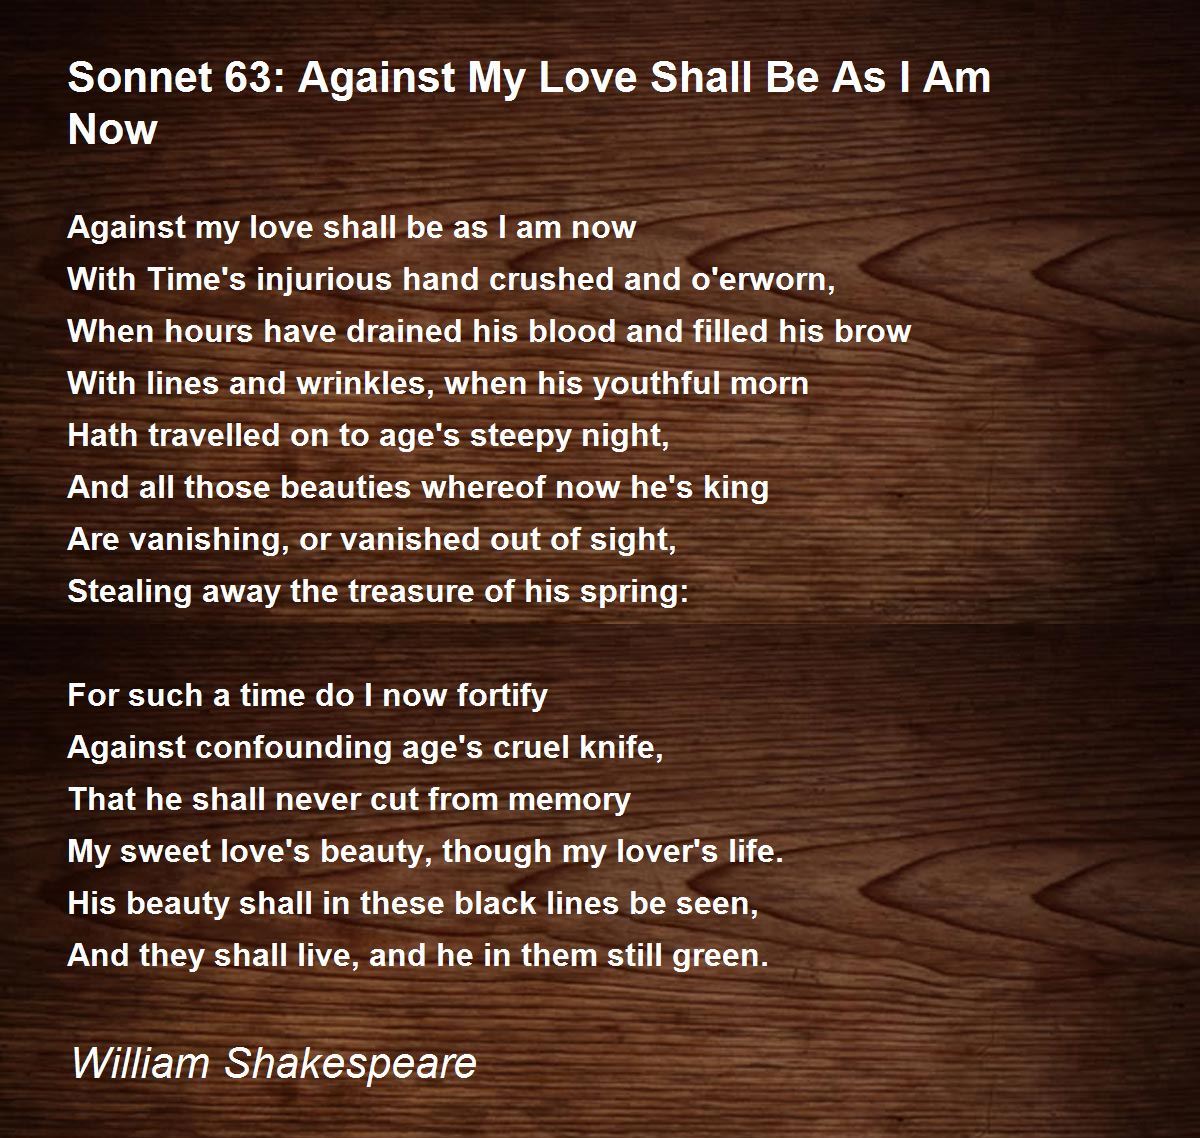 thesis for sonnet 63